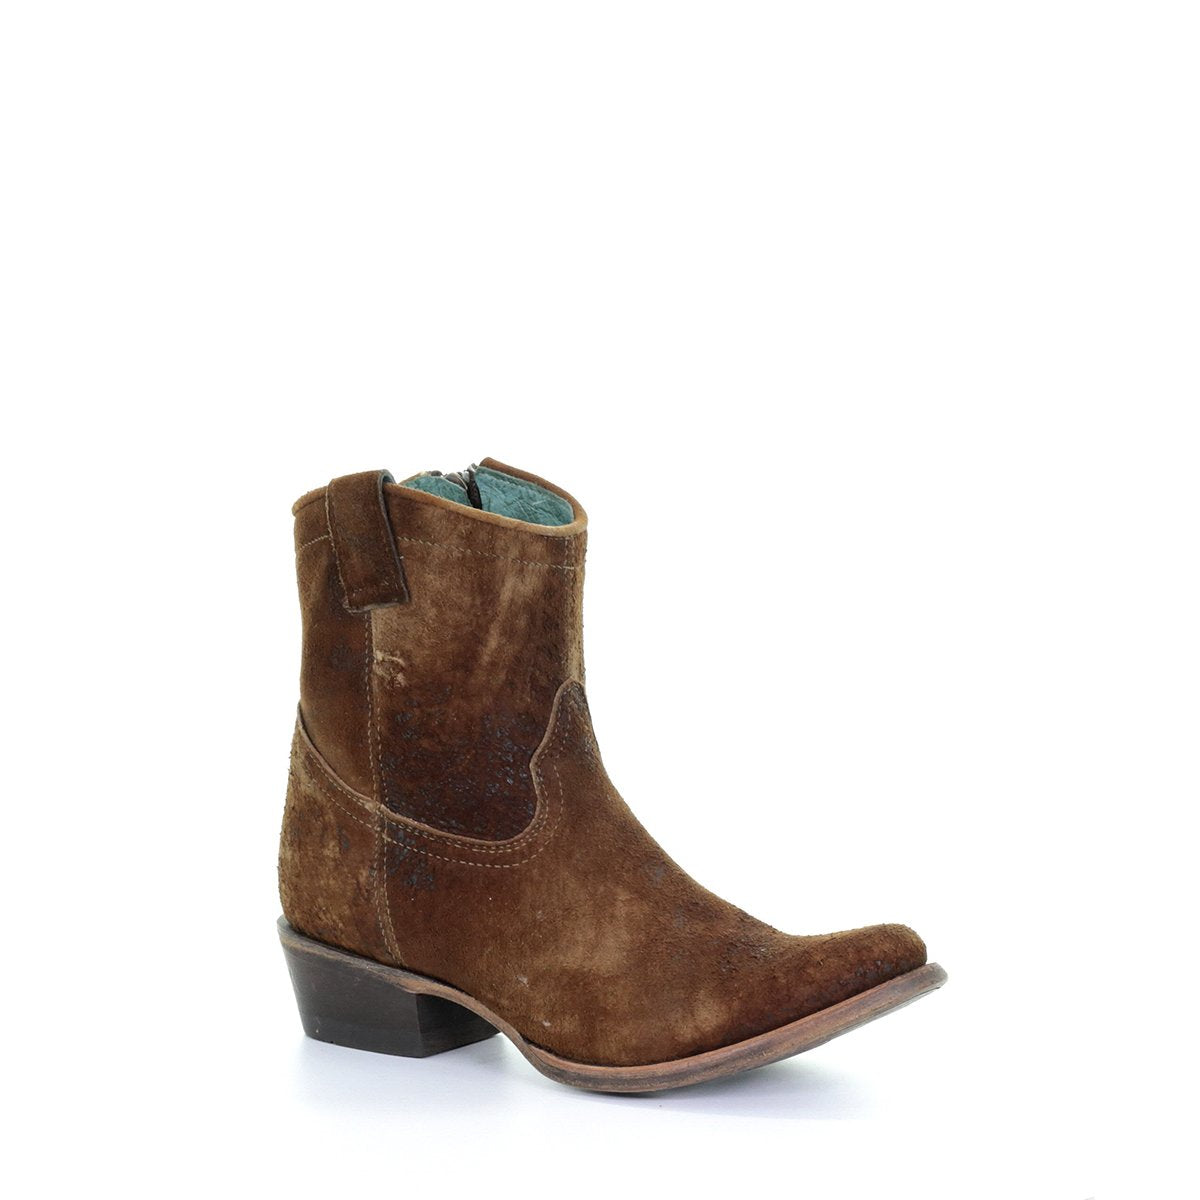 Chocolate Distressed Lamb Short Bootie, By Corral